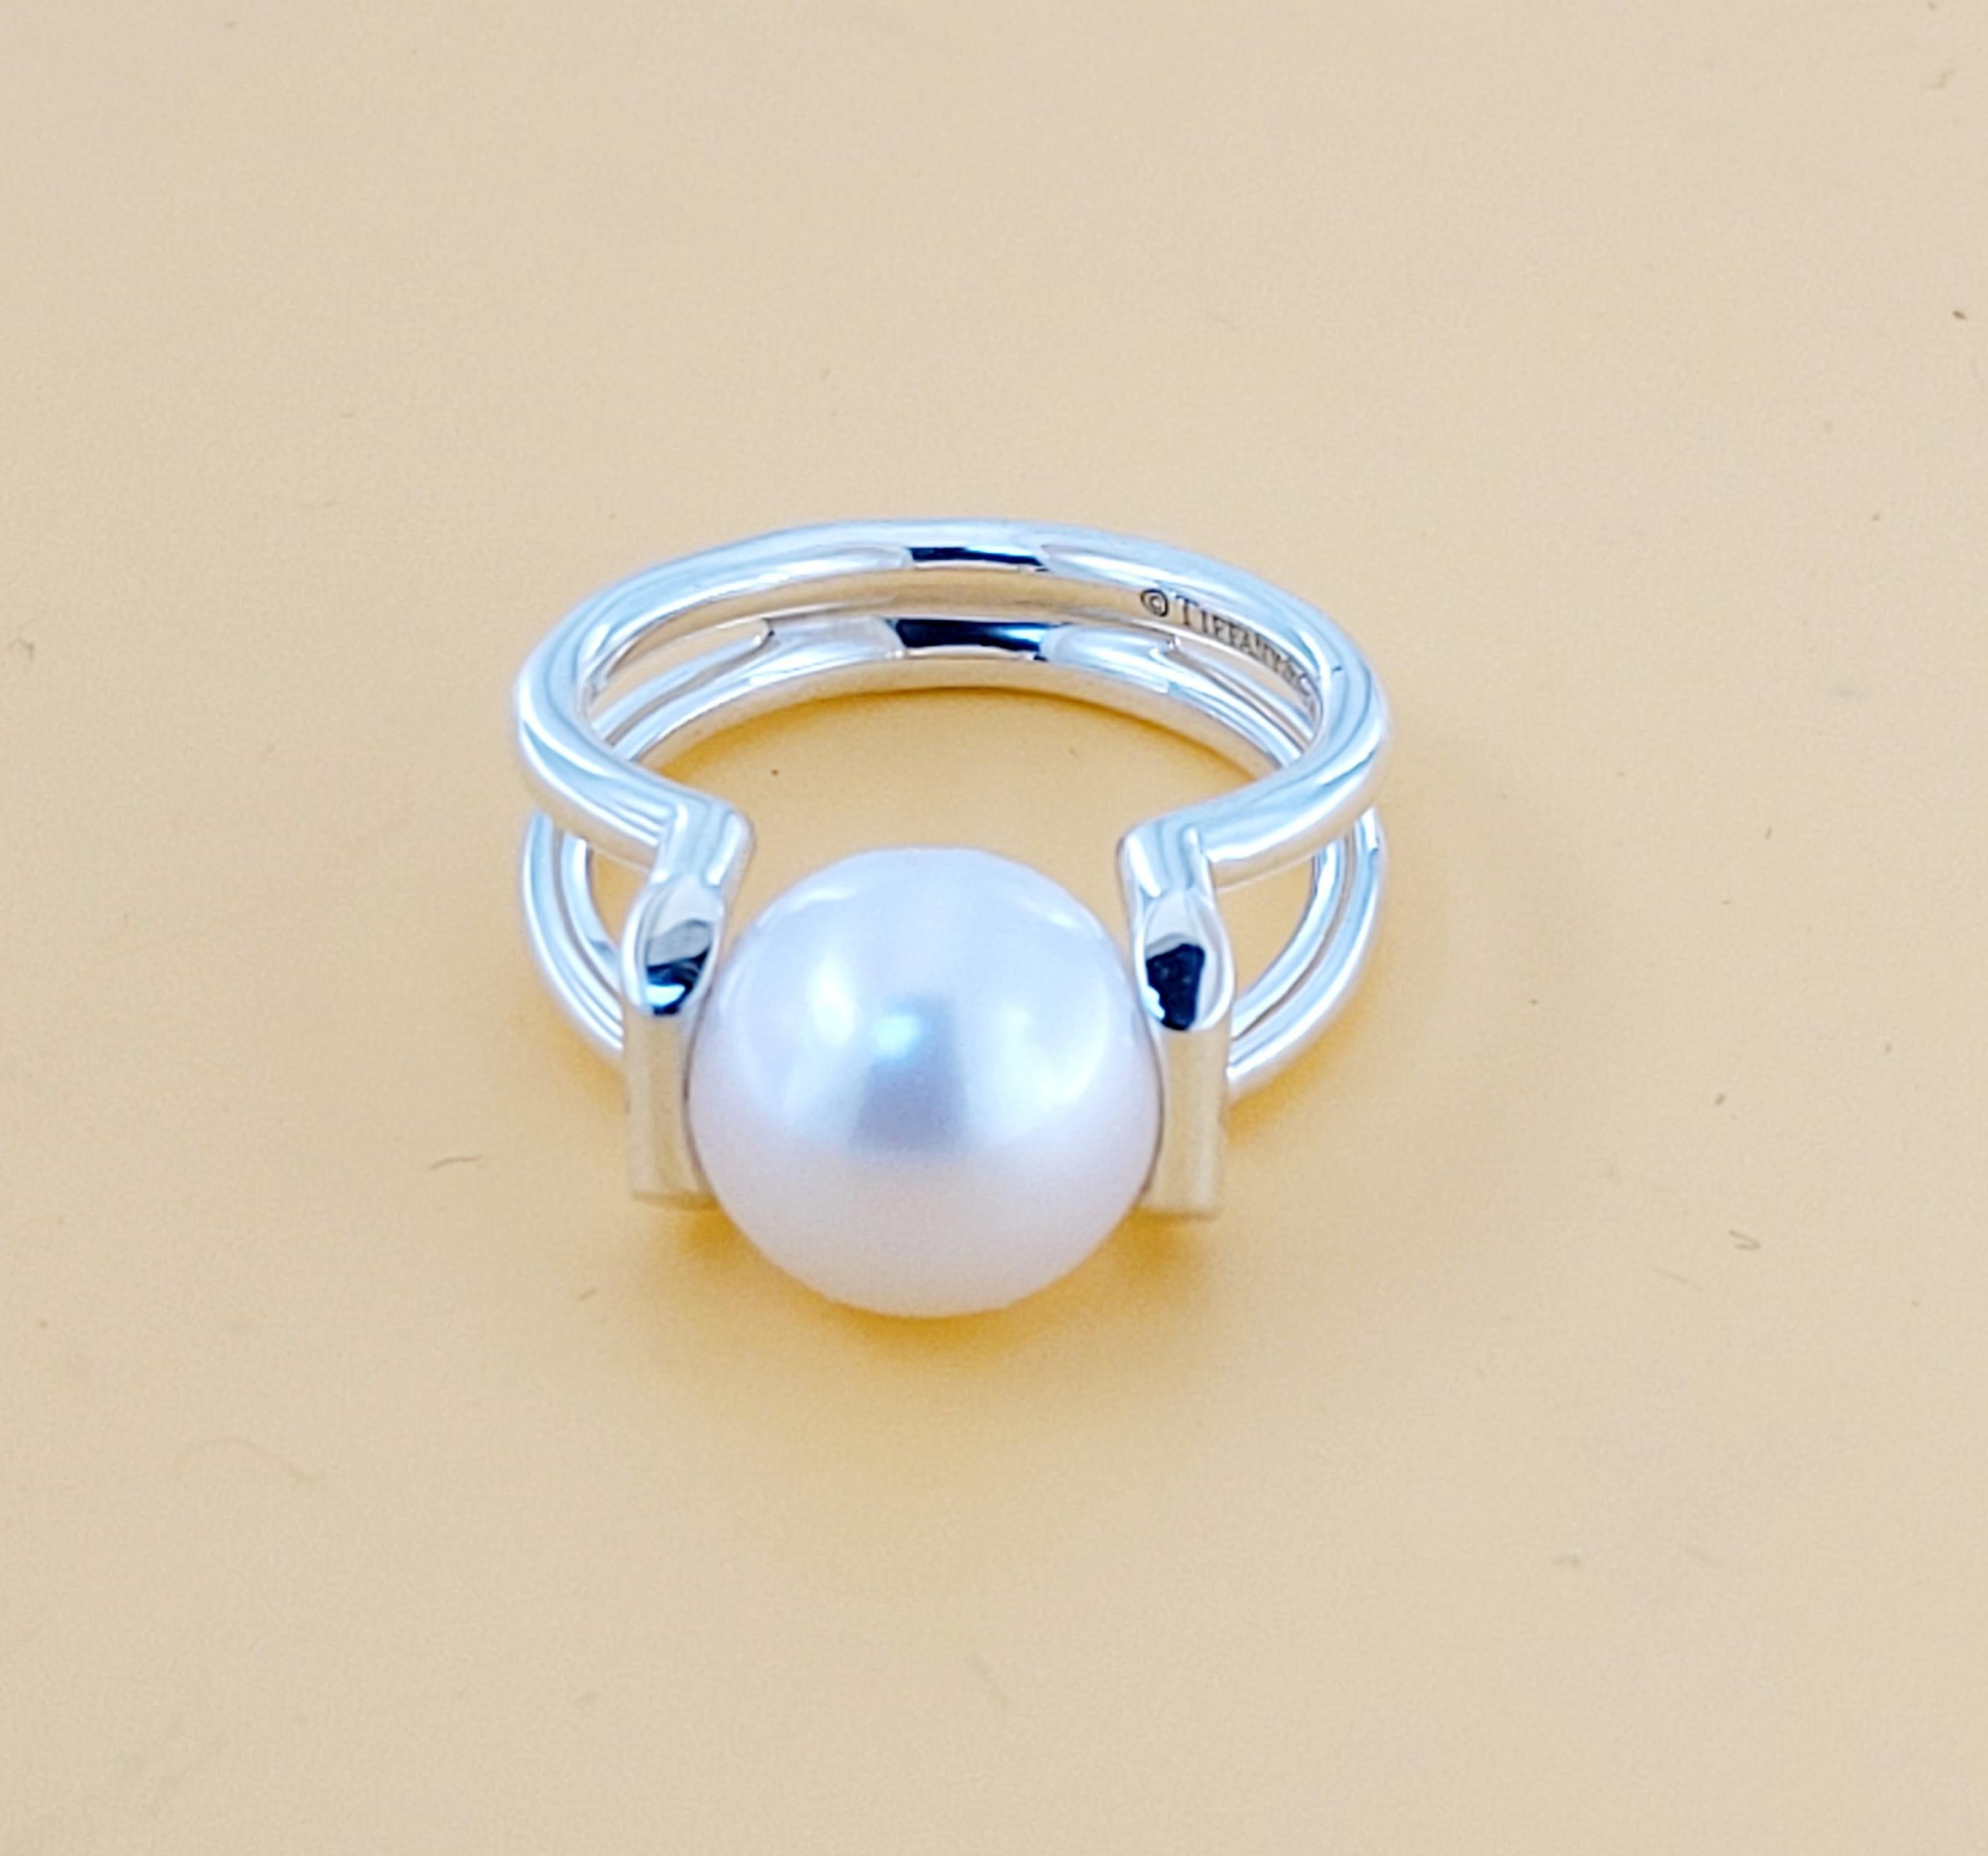 Brand Tiffany & co
Gender women
Condition Never worn 
Sterling silver 925
freshwater cultured pearl
Pearl dimension 10x10
Ring size 5
Weight 5gr
Retail price $900
Comes with Tiffany & co pouch